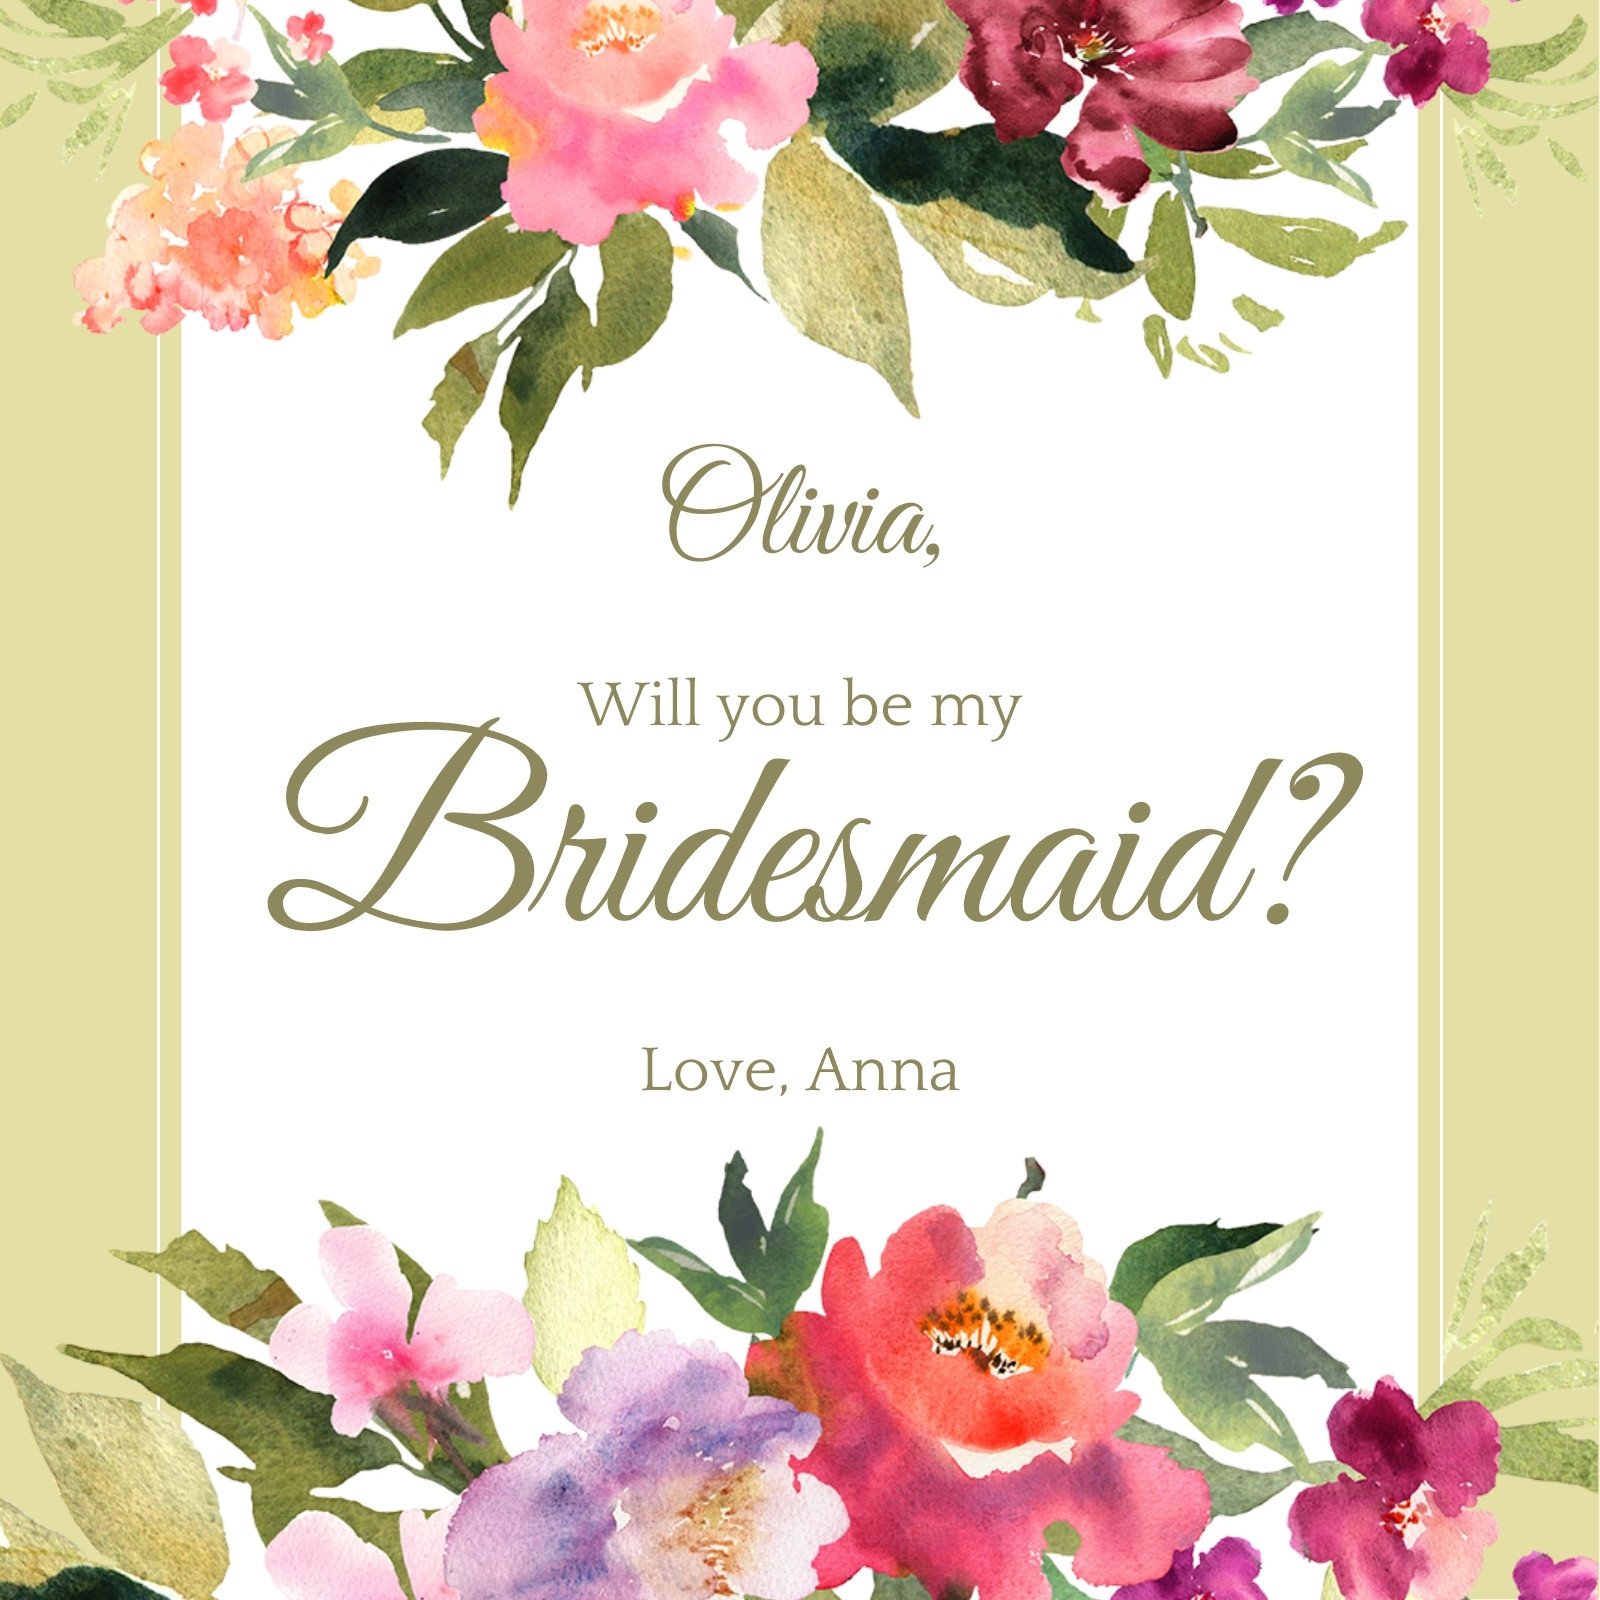 Will You Be My Bridesmaid Proposal Card Editable Template With Photo Postcard Size Printable 